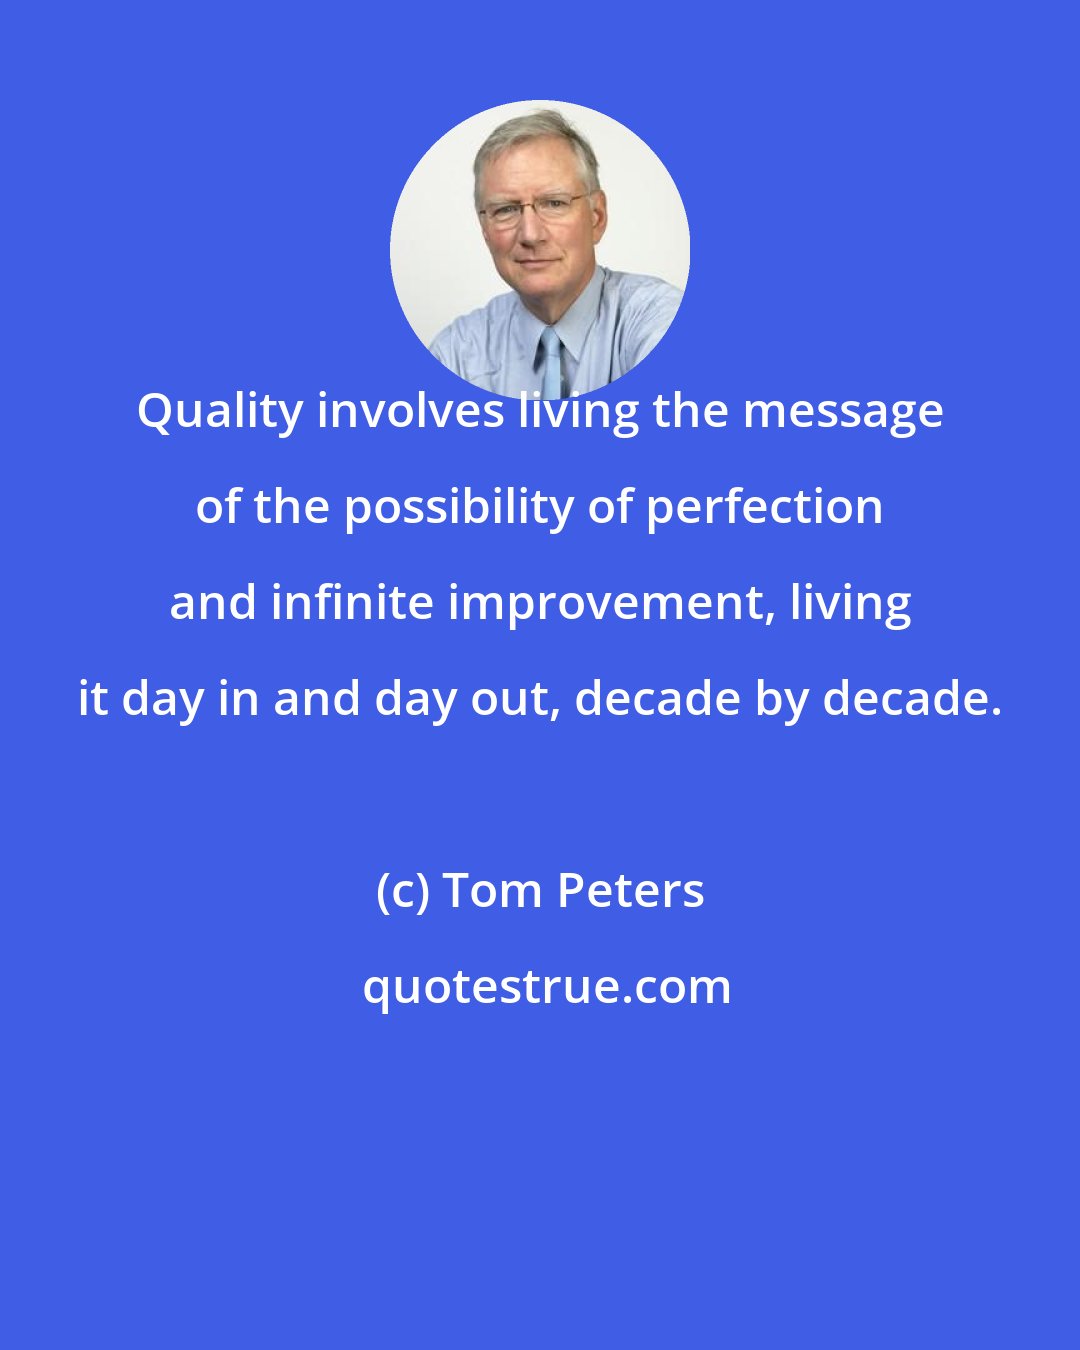 Tom Peters: Quality involves living the message of the possibility of perfection and infinite improvement, living it day in and day out, decade by decade.